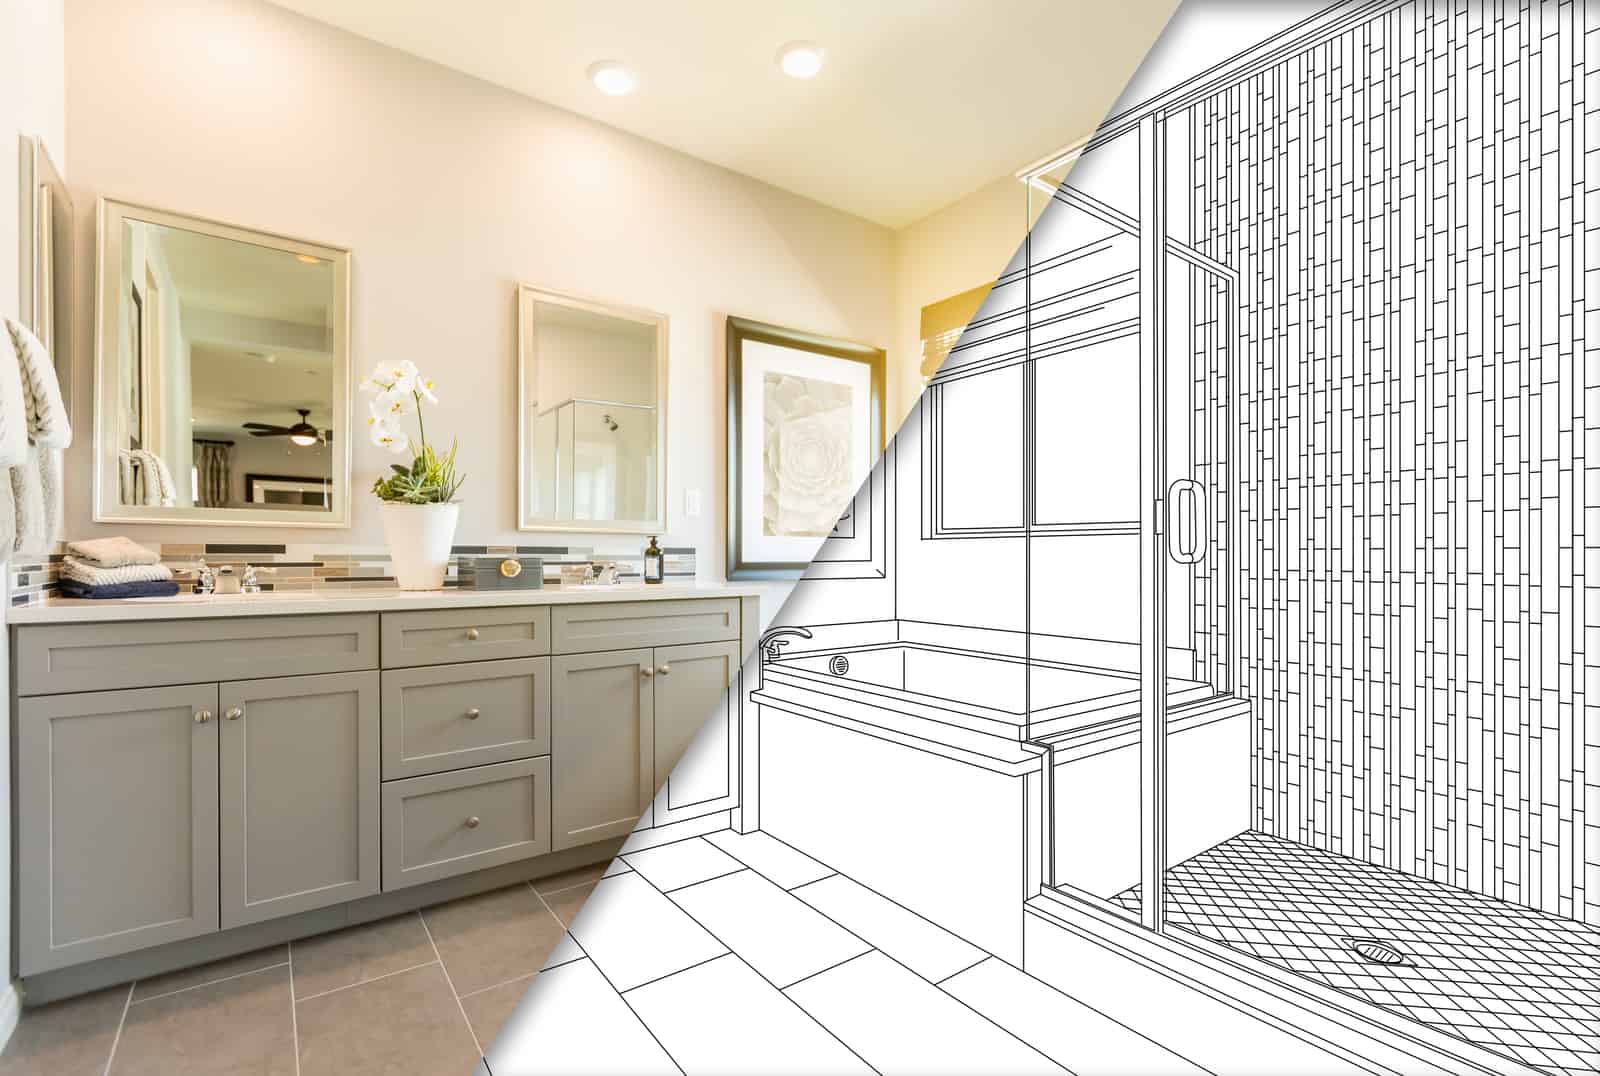 10-questions-to-ask-before-starting-a-bathroom-remodel